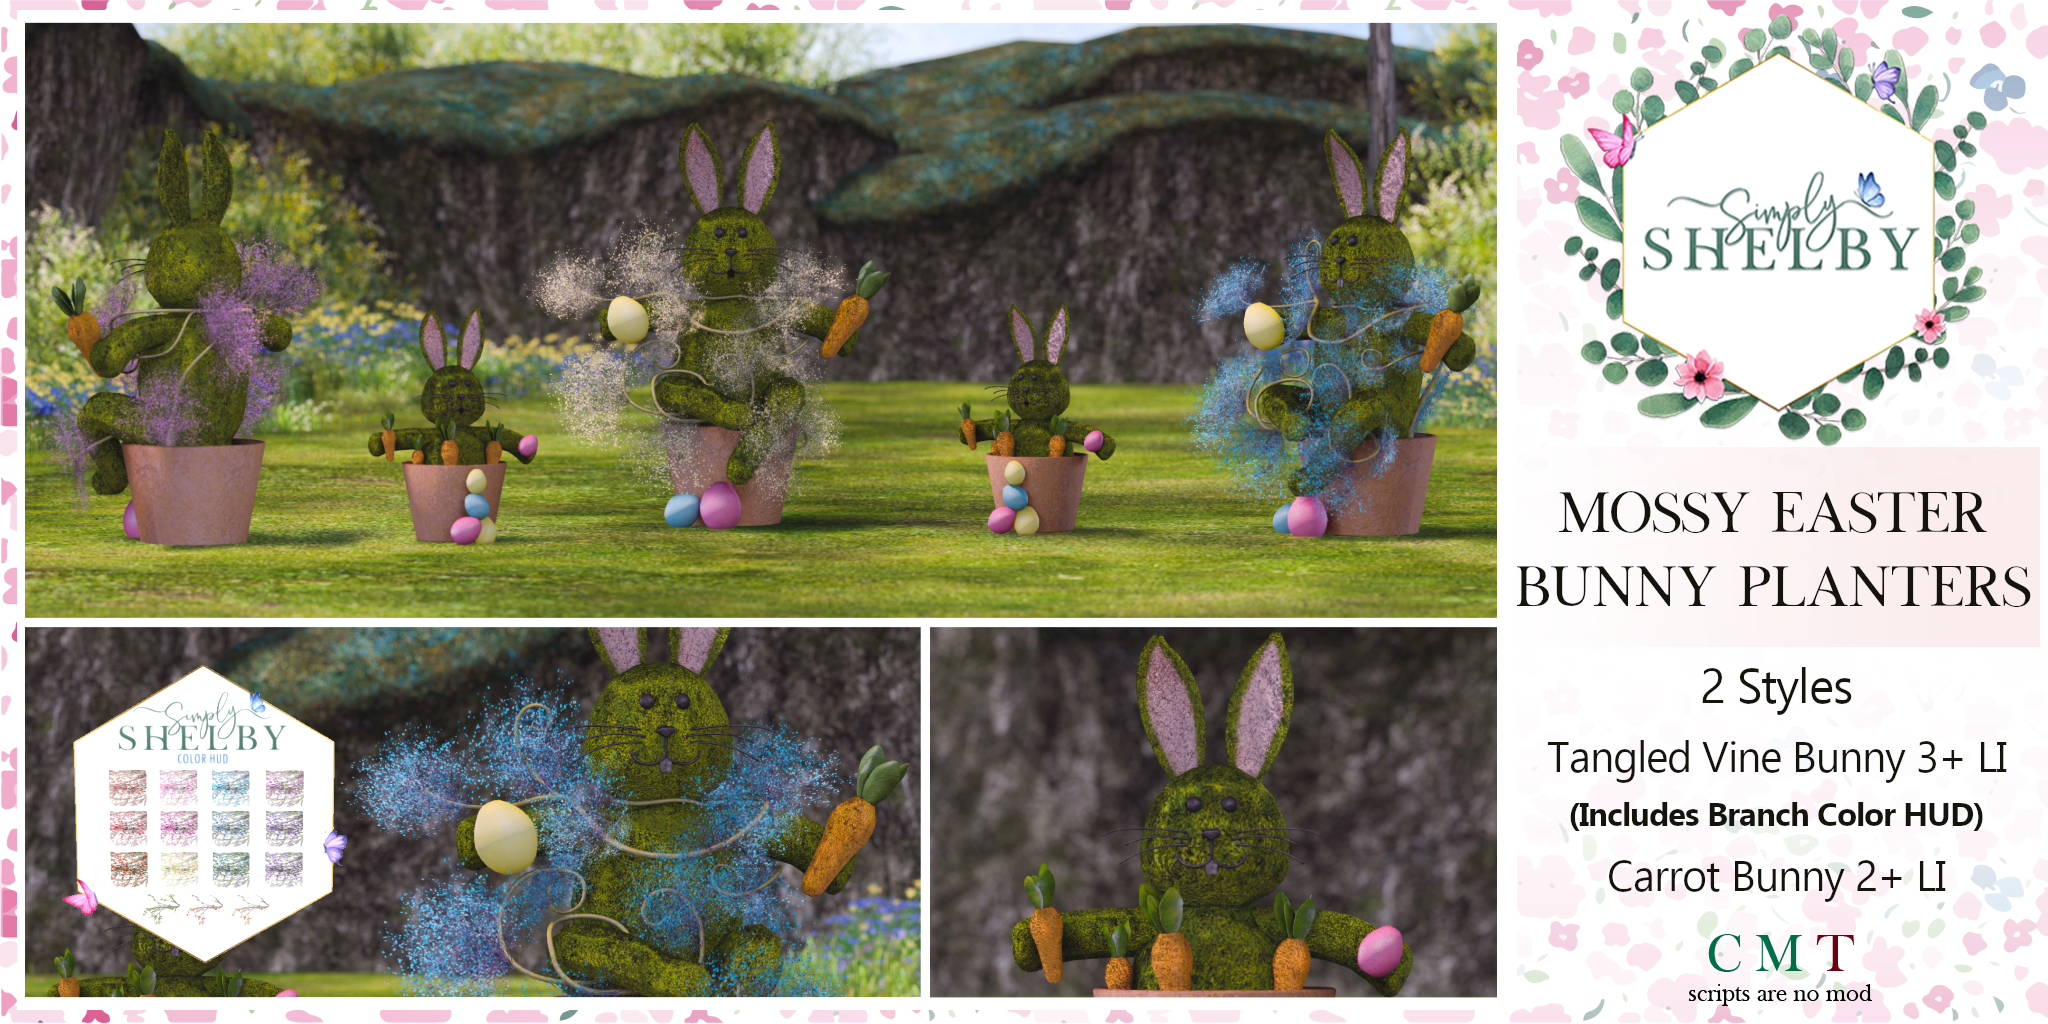 Simply Shelby – Mini Easter Egg Baskets & Mossy Easter Bunny Planters